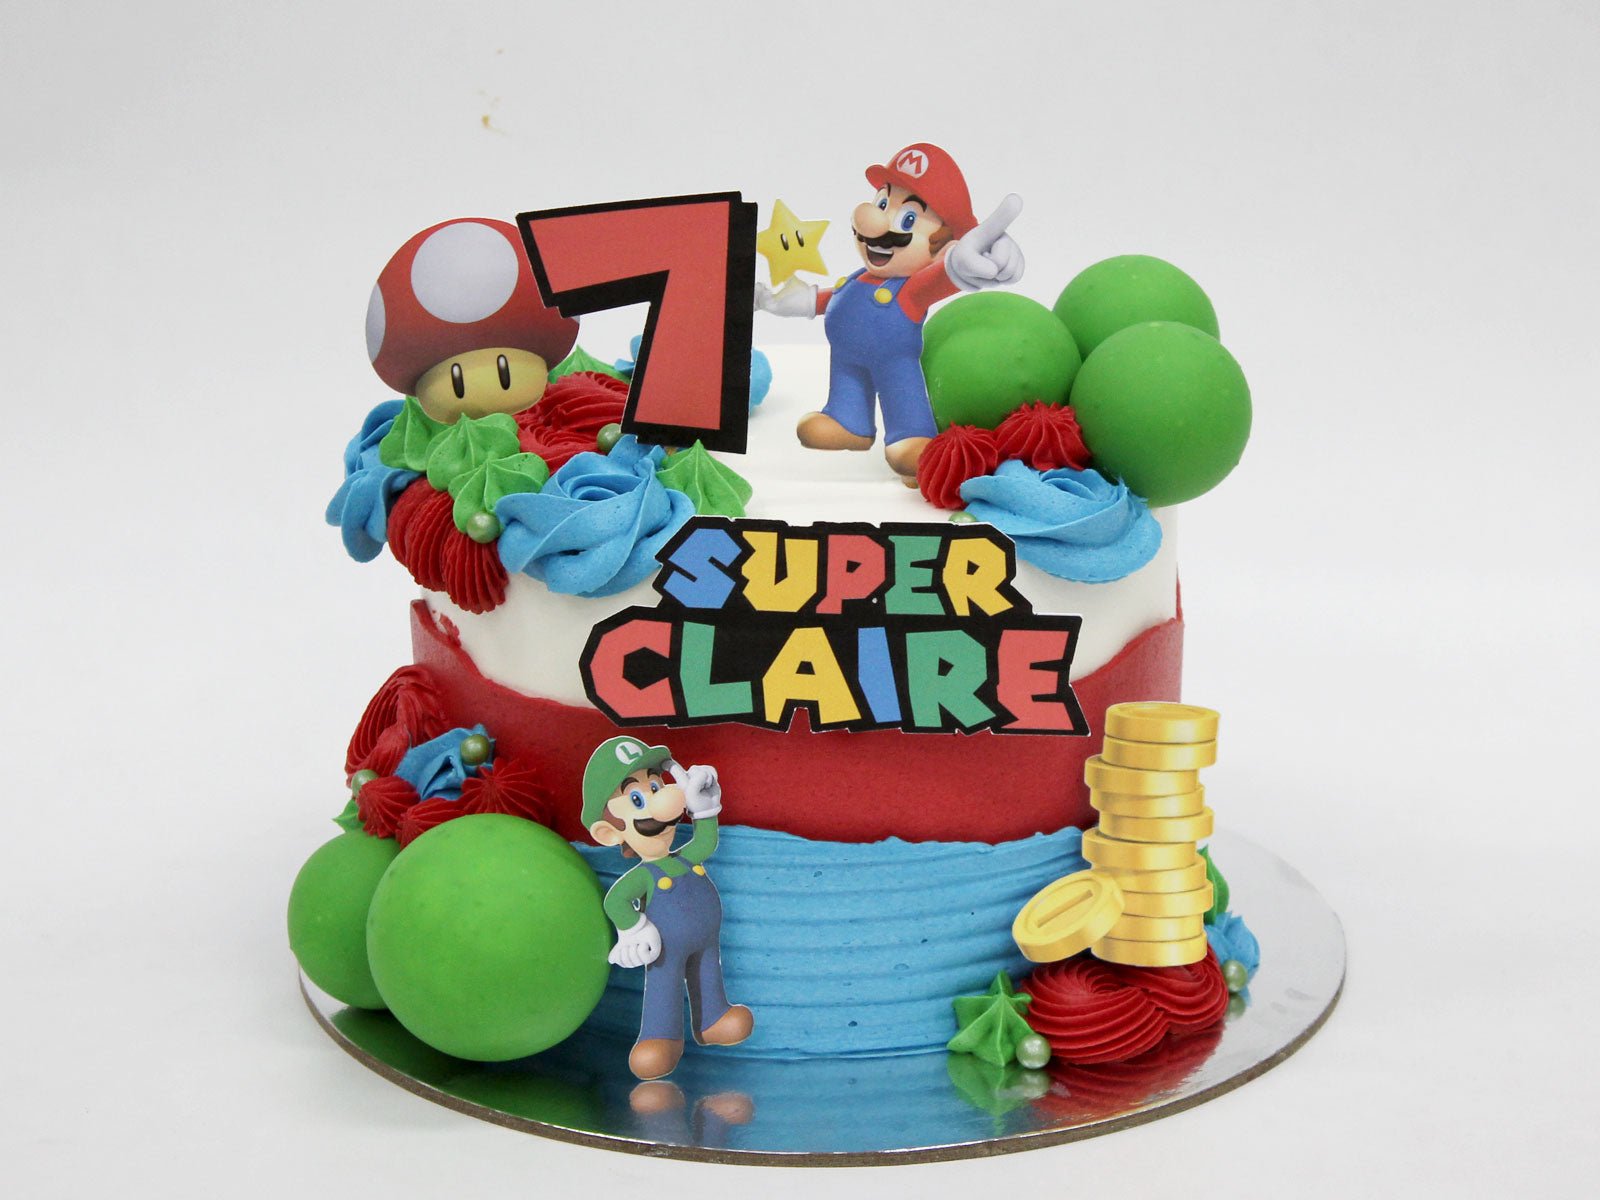 Super Mario Cake - Buy Online, Free UK Delivery — New Cakes